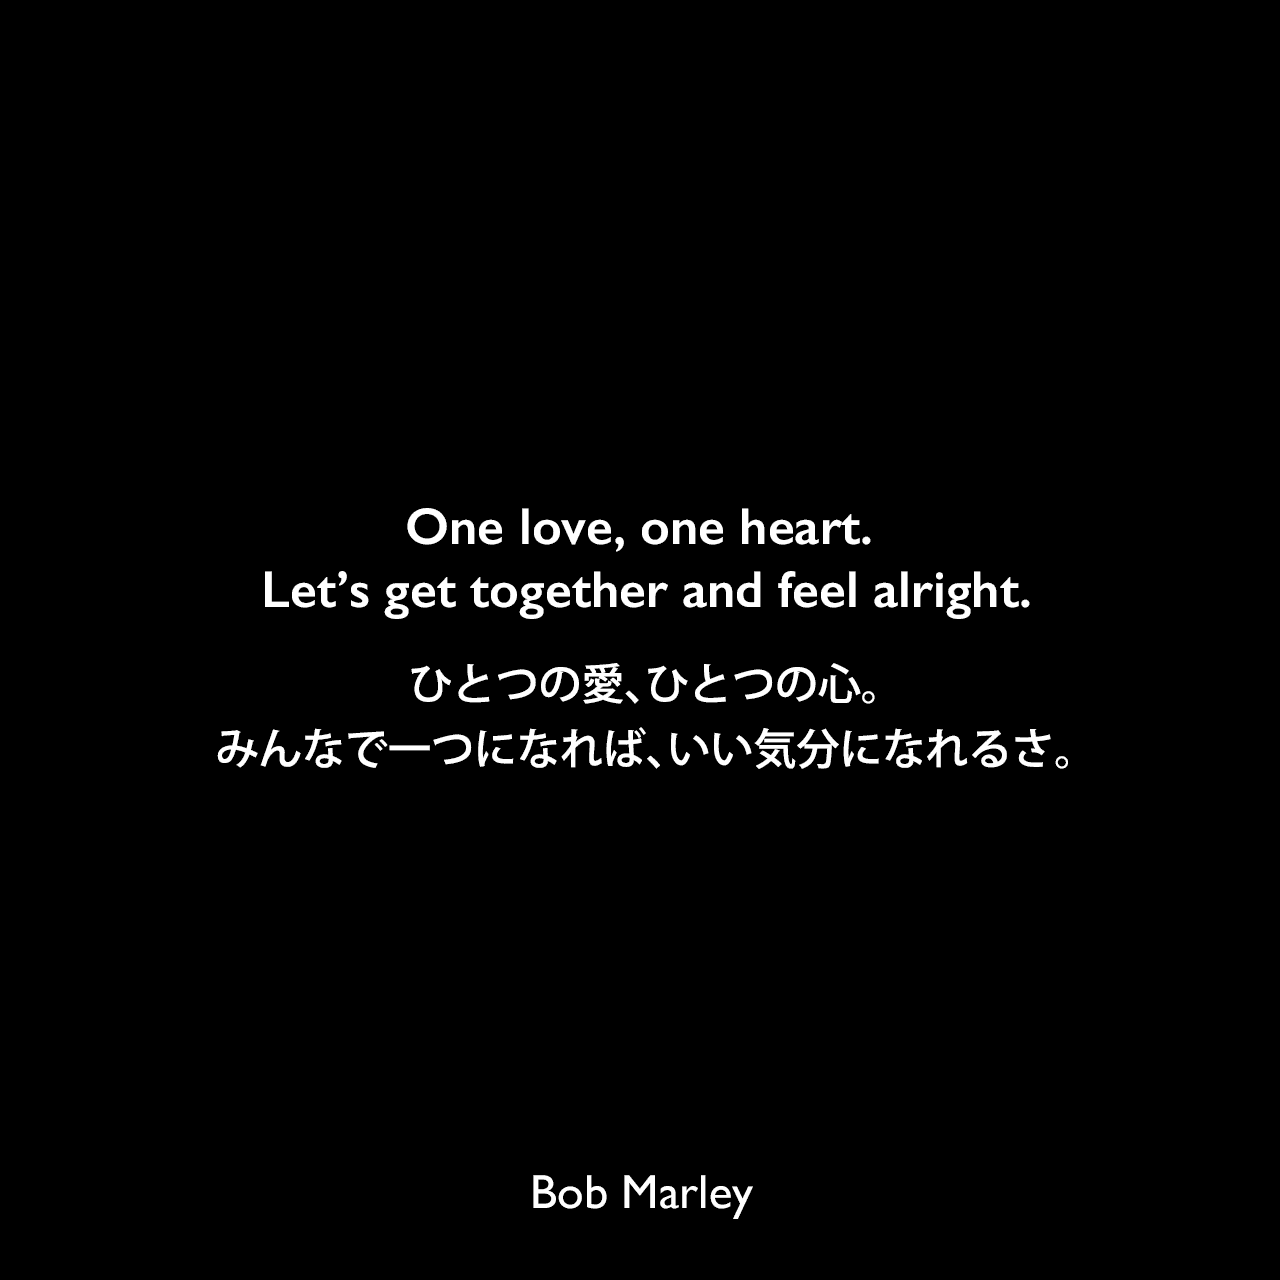 One love, one heart. Let’s get together and feel alright.ひとつの愛、ひとつの心。みんなで一つになれば、いい気分になれるさ。Bob Marley